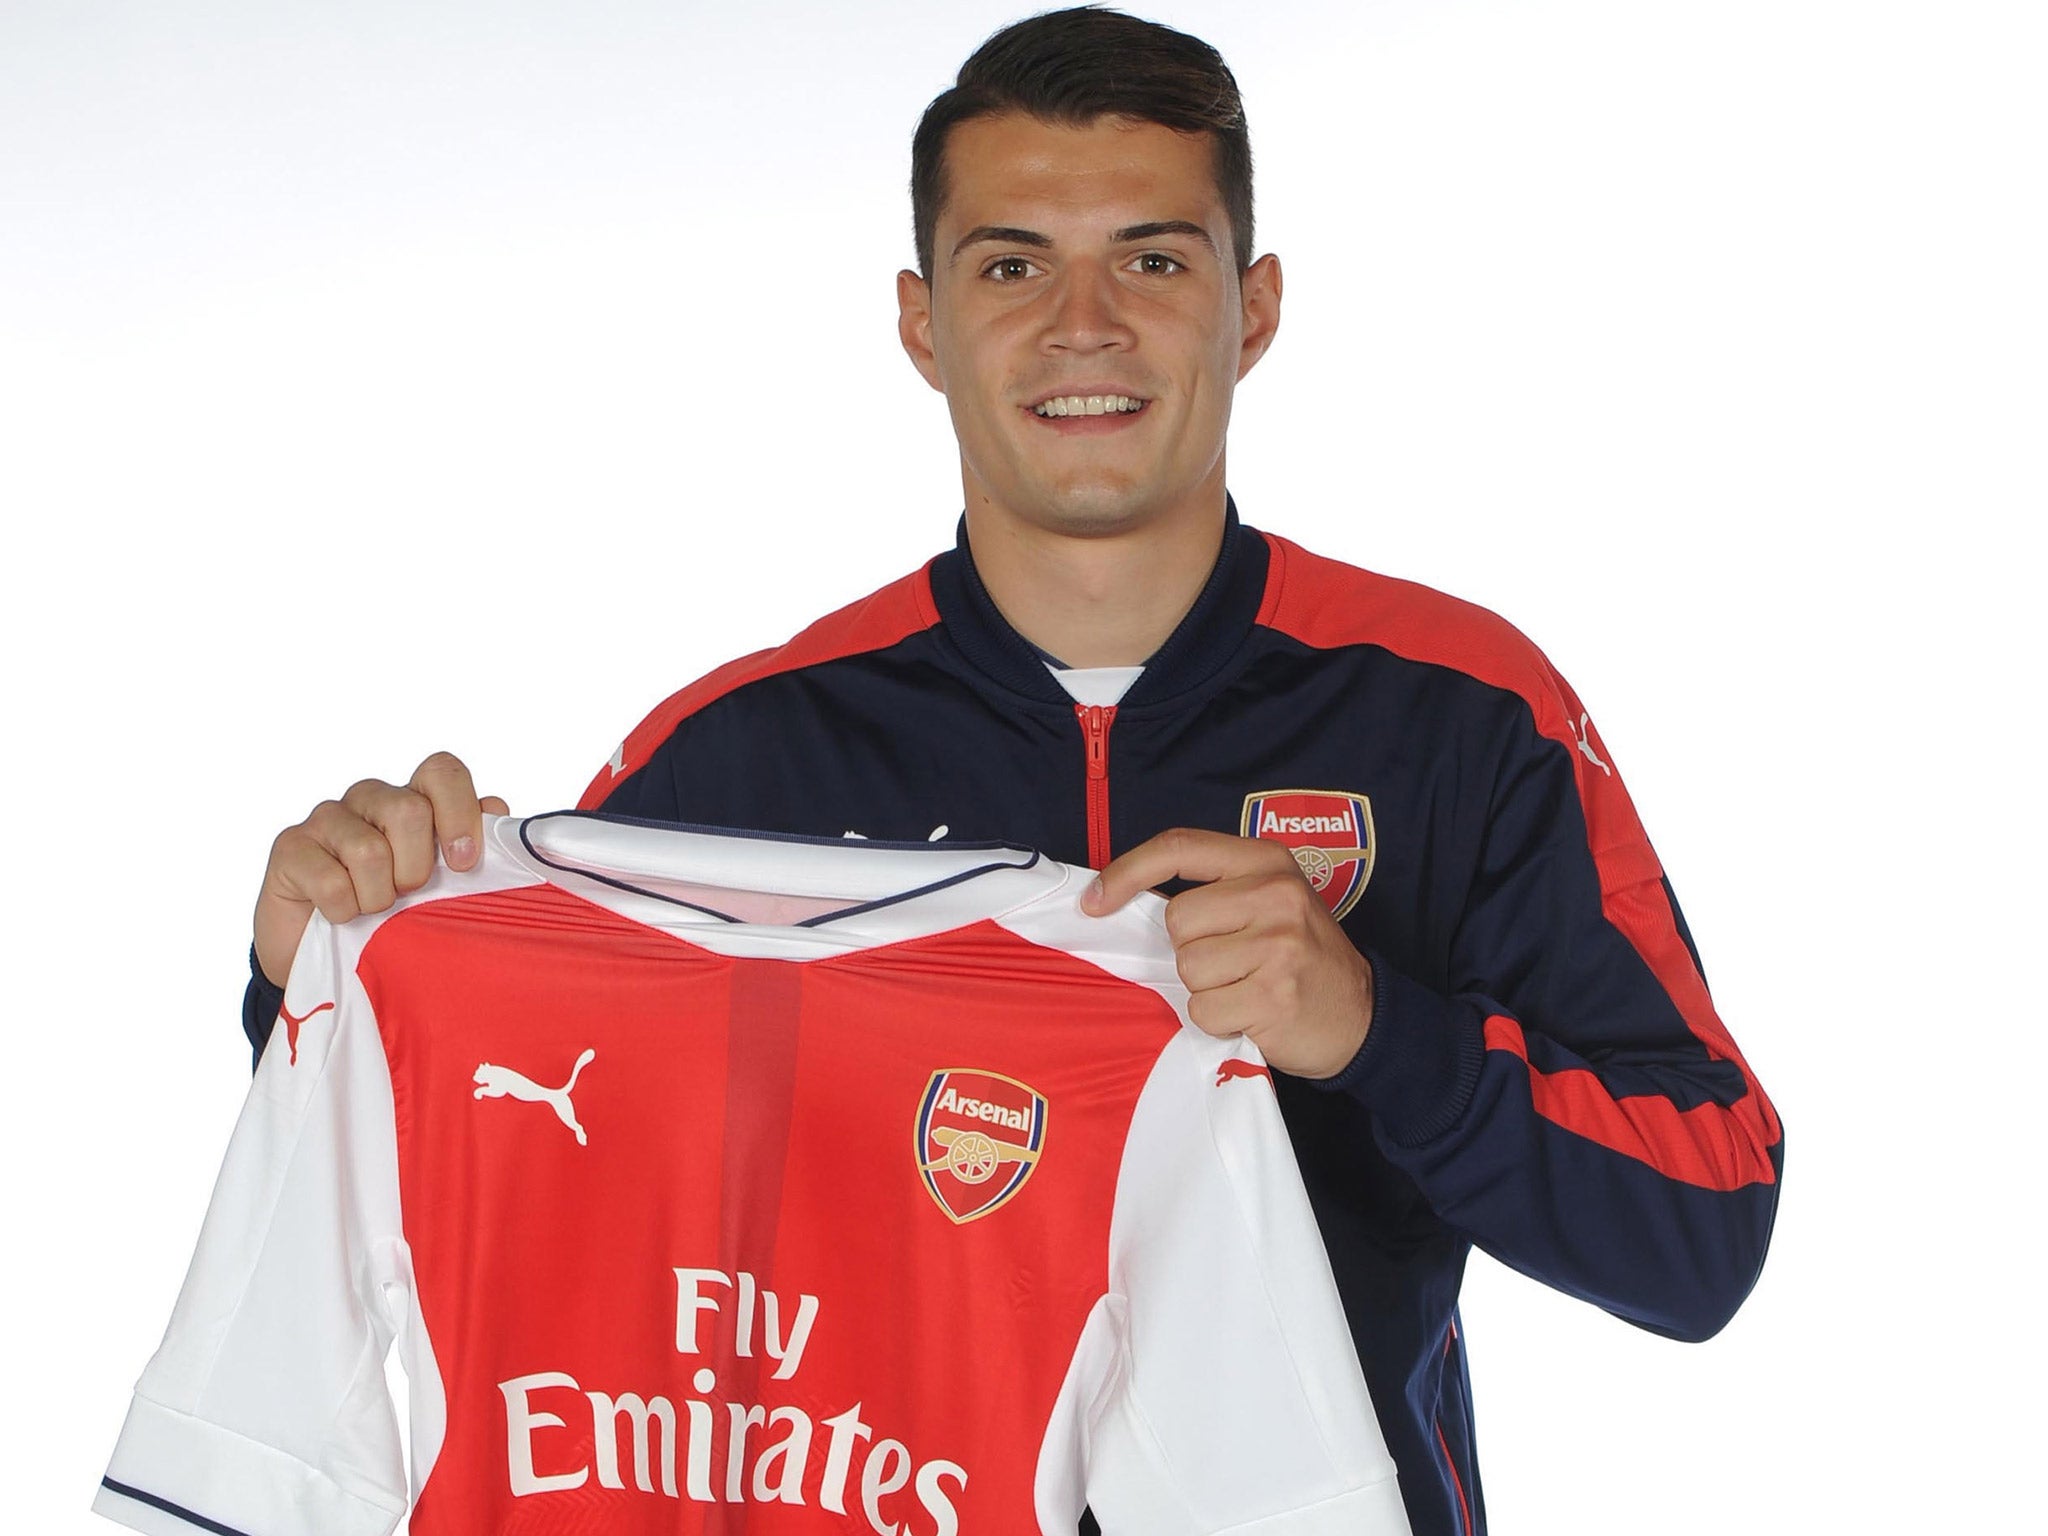 Arsenal signing Granit Xhaka has changed his shirt number from 16 to 29